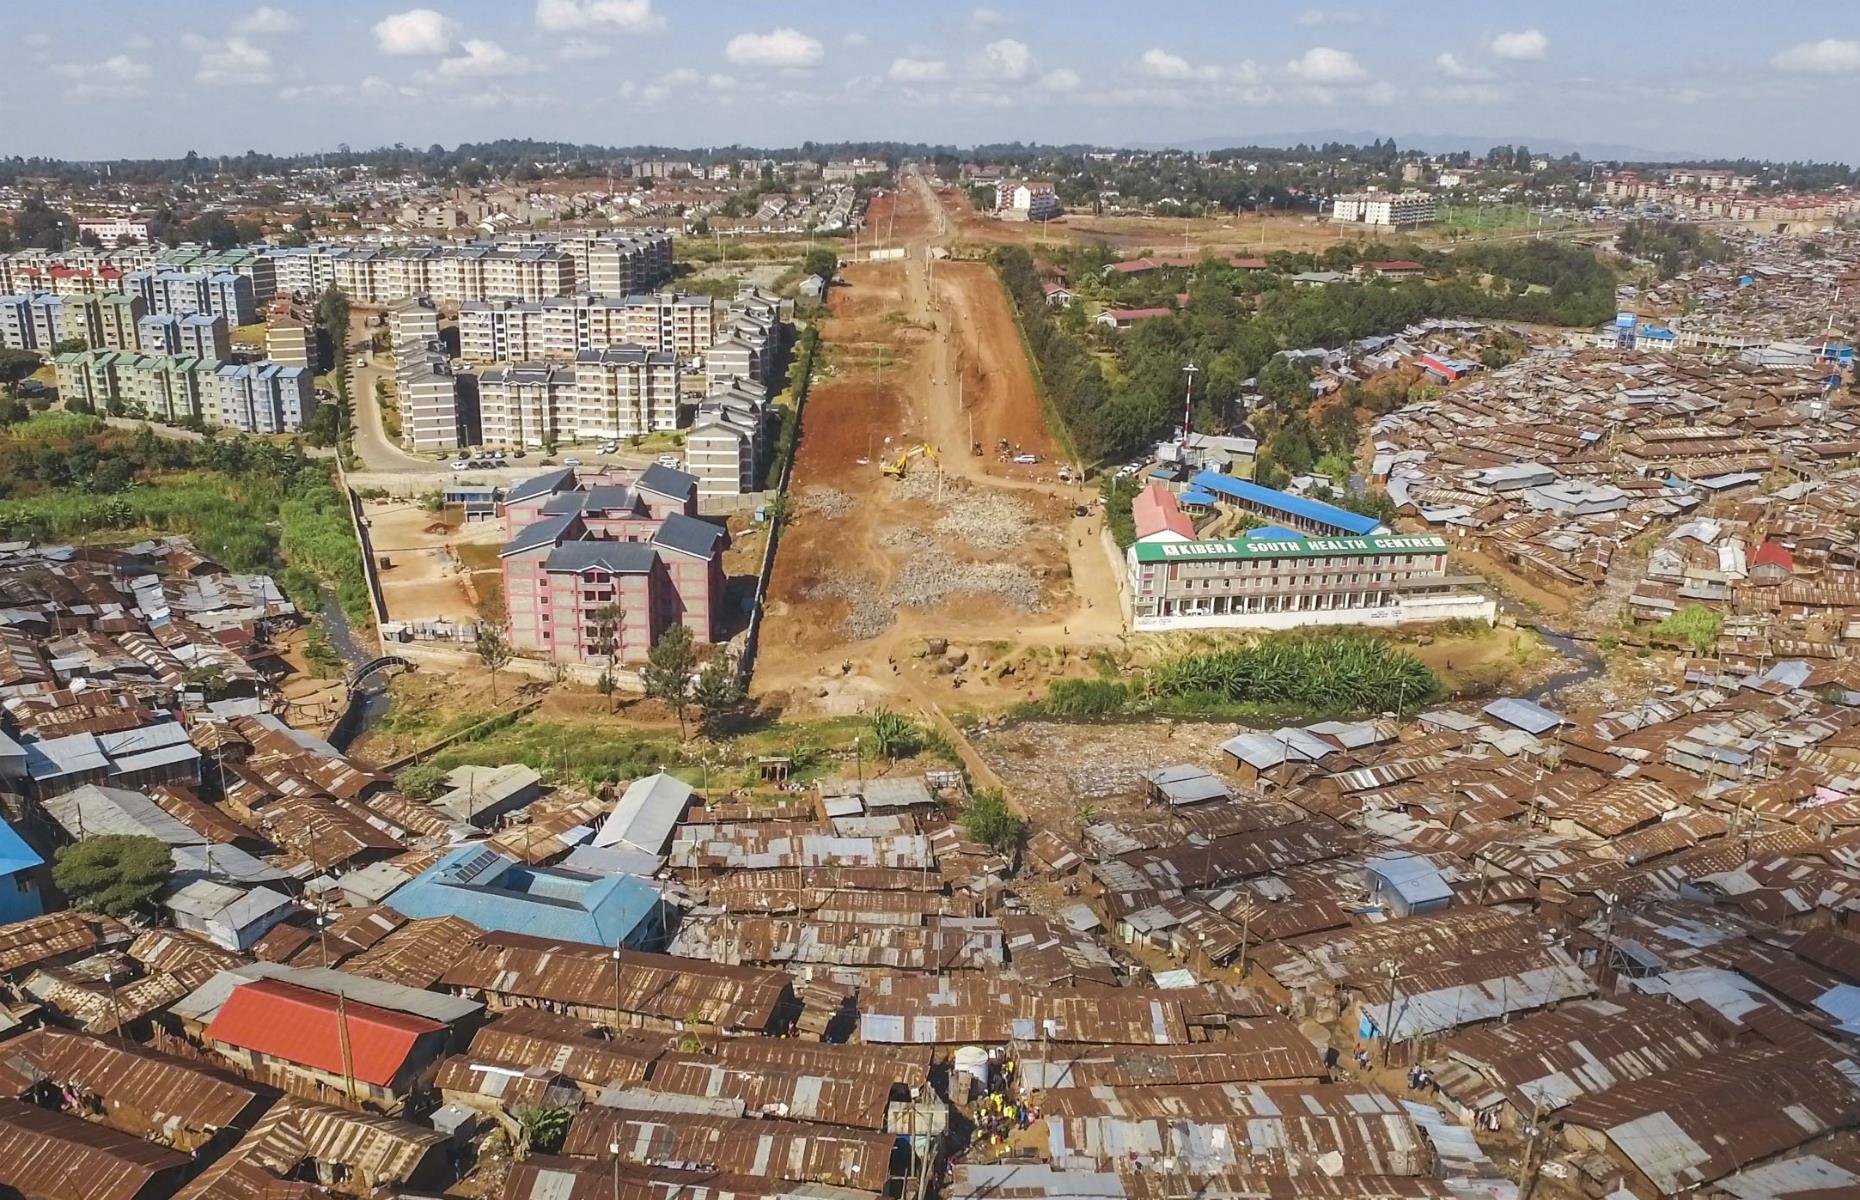 A road (pictured in its construction phase) is planned to cut through the Kibera slum, but this will only serve to displace thousands of those who call these tin and mud huts home.